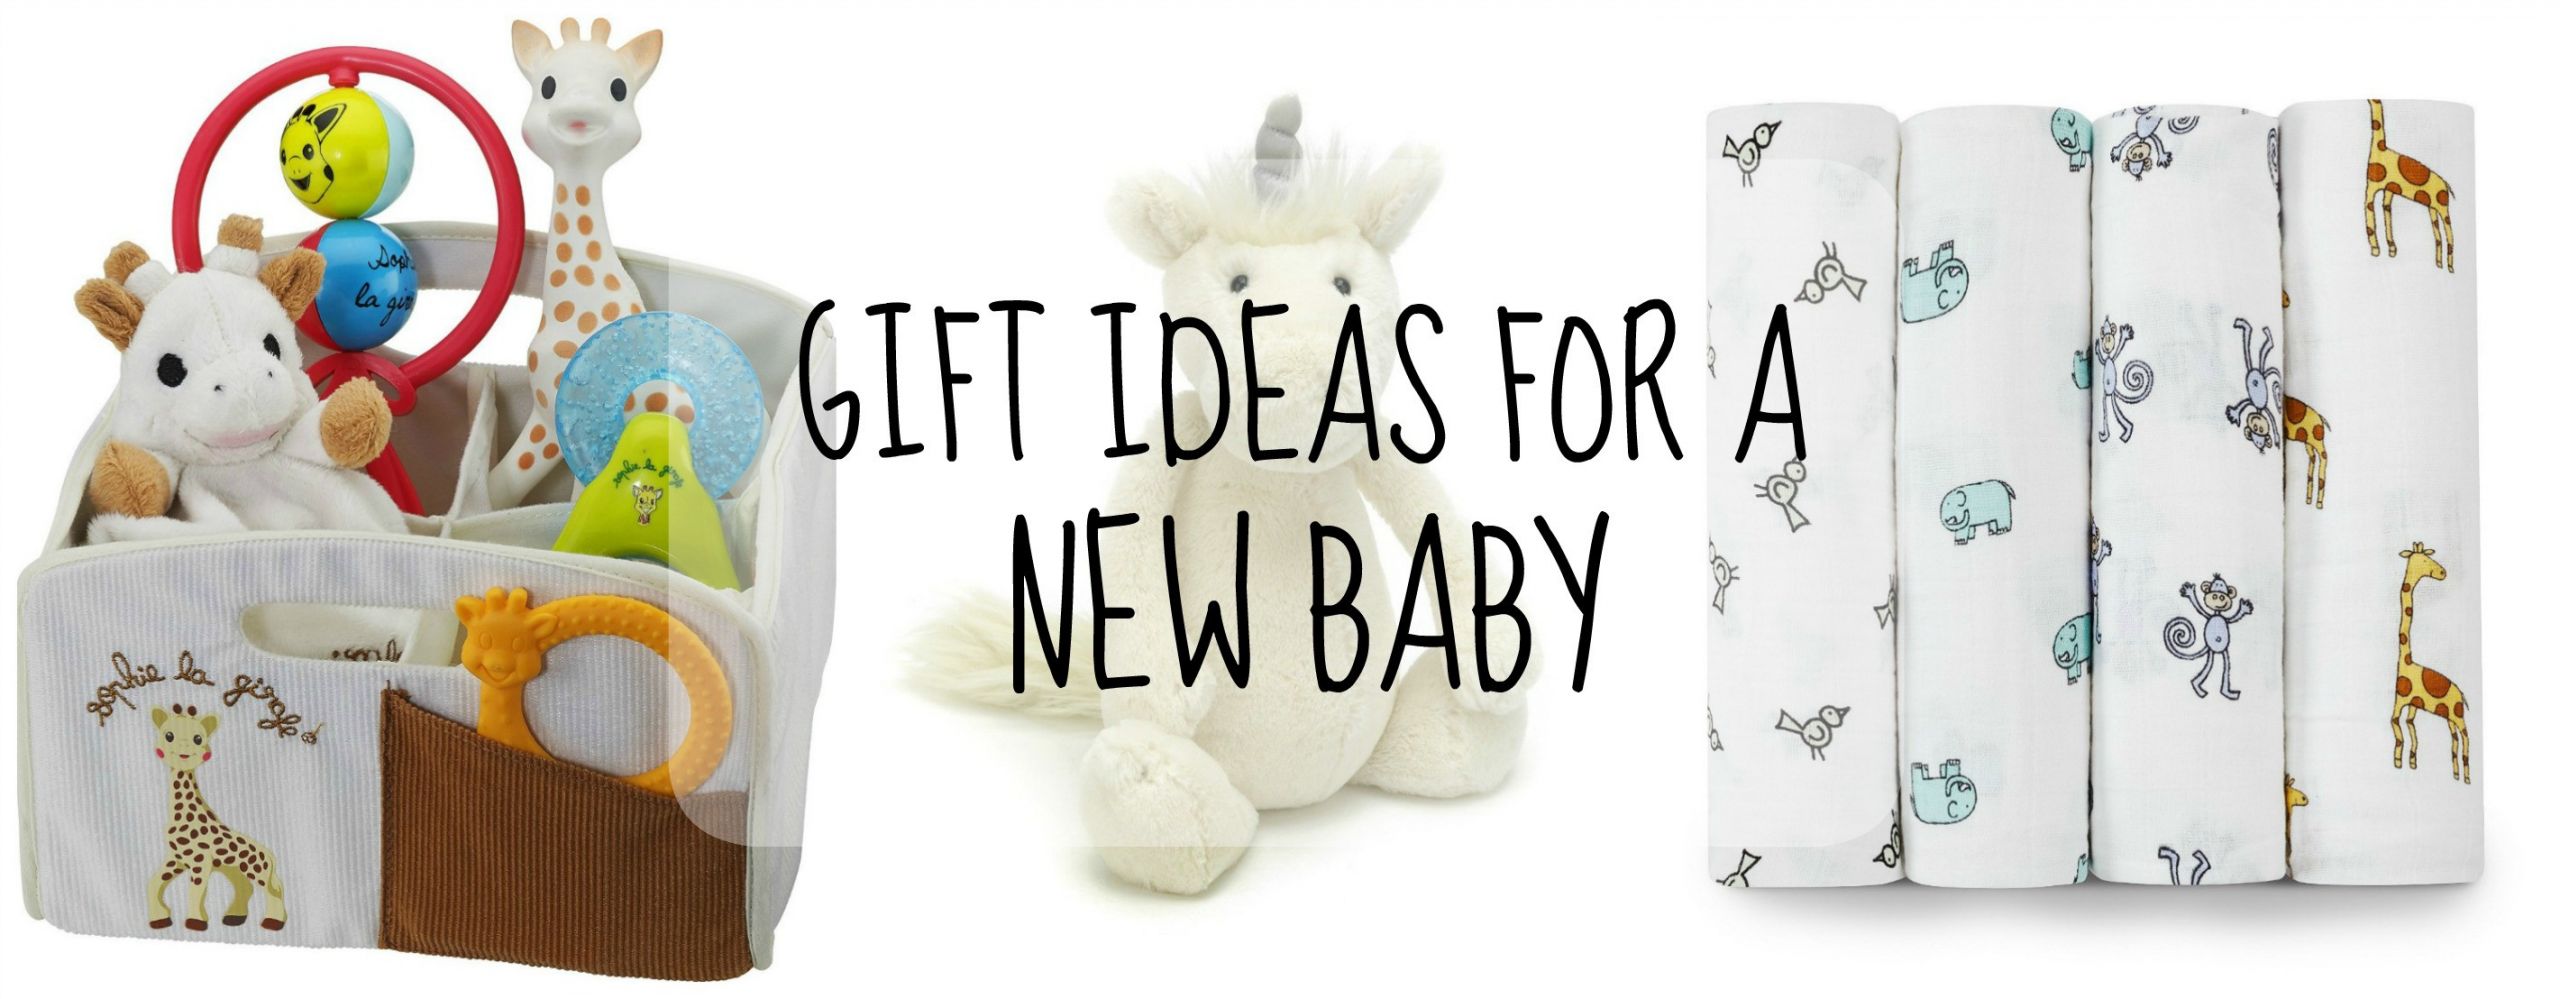 Ideas For New Baby Gift
 Gift Ideas for a New Baby Lamb & Bear